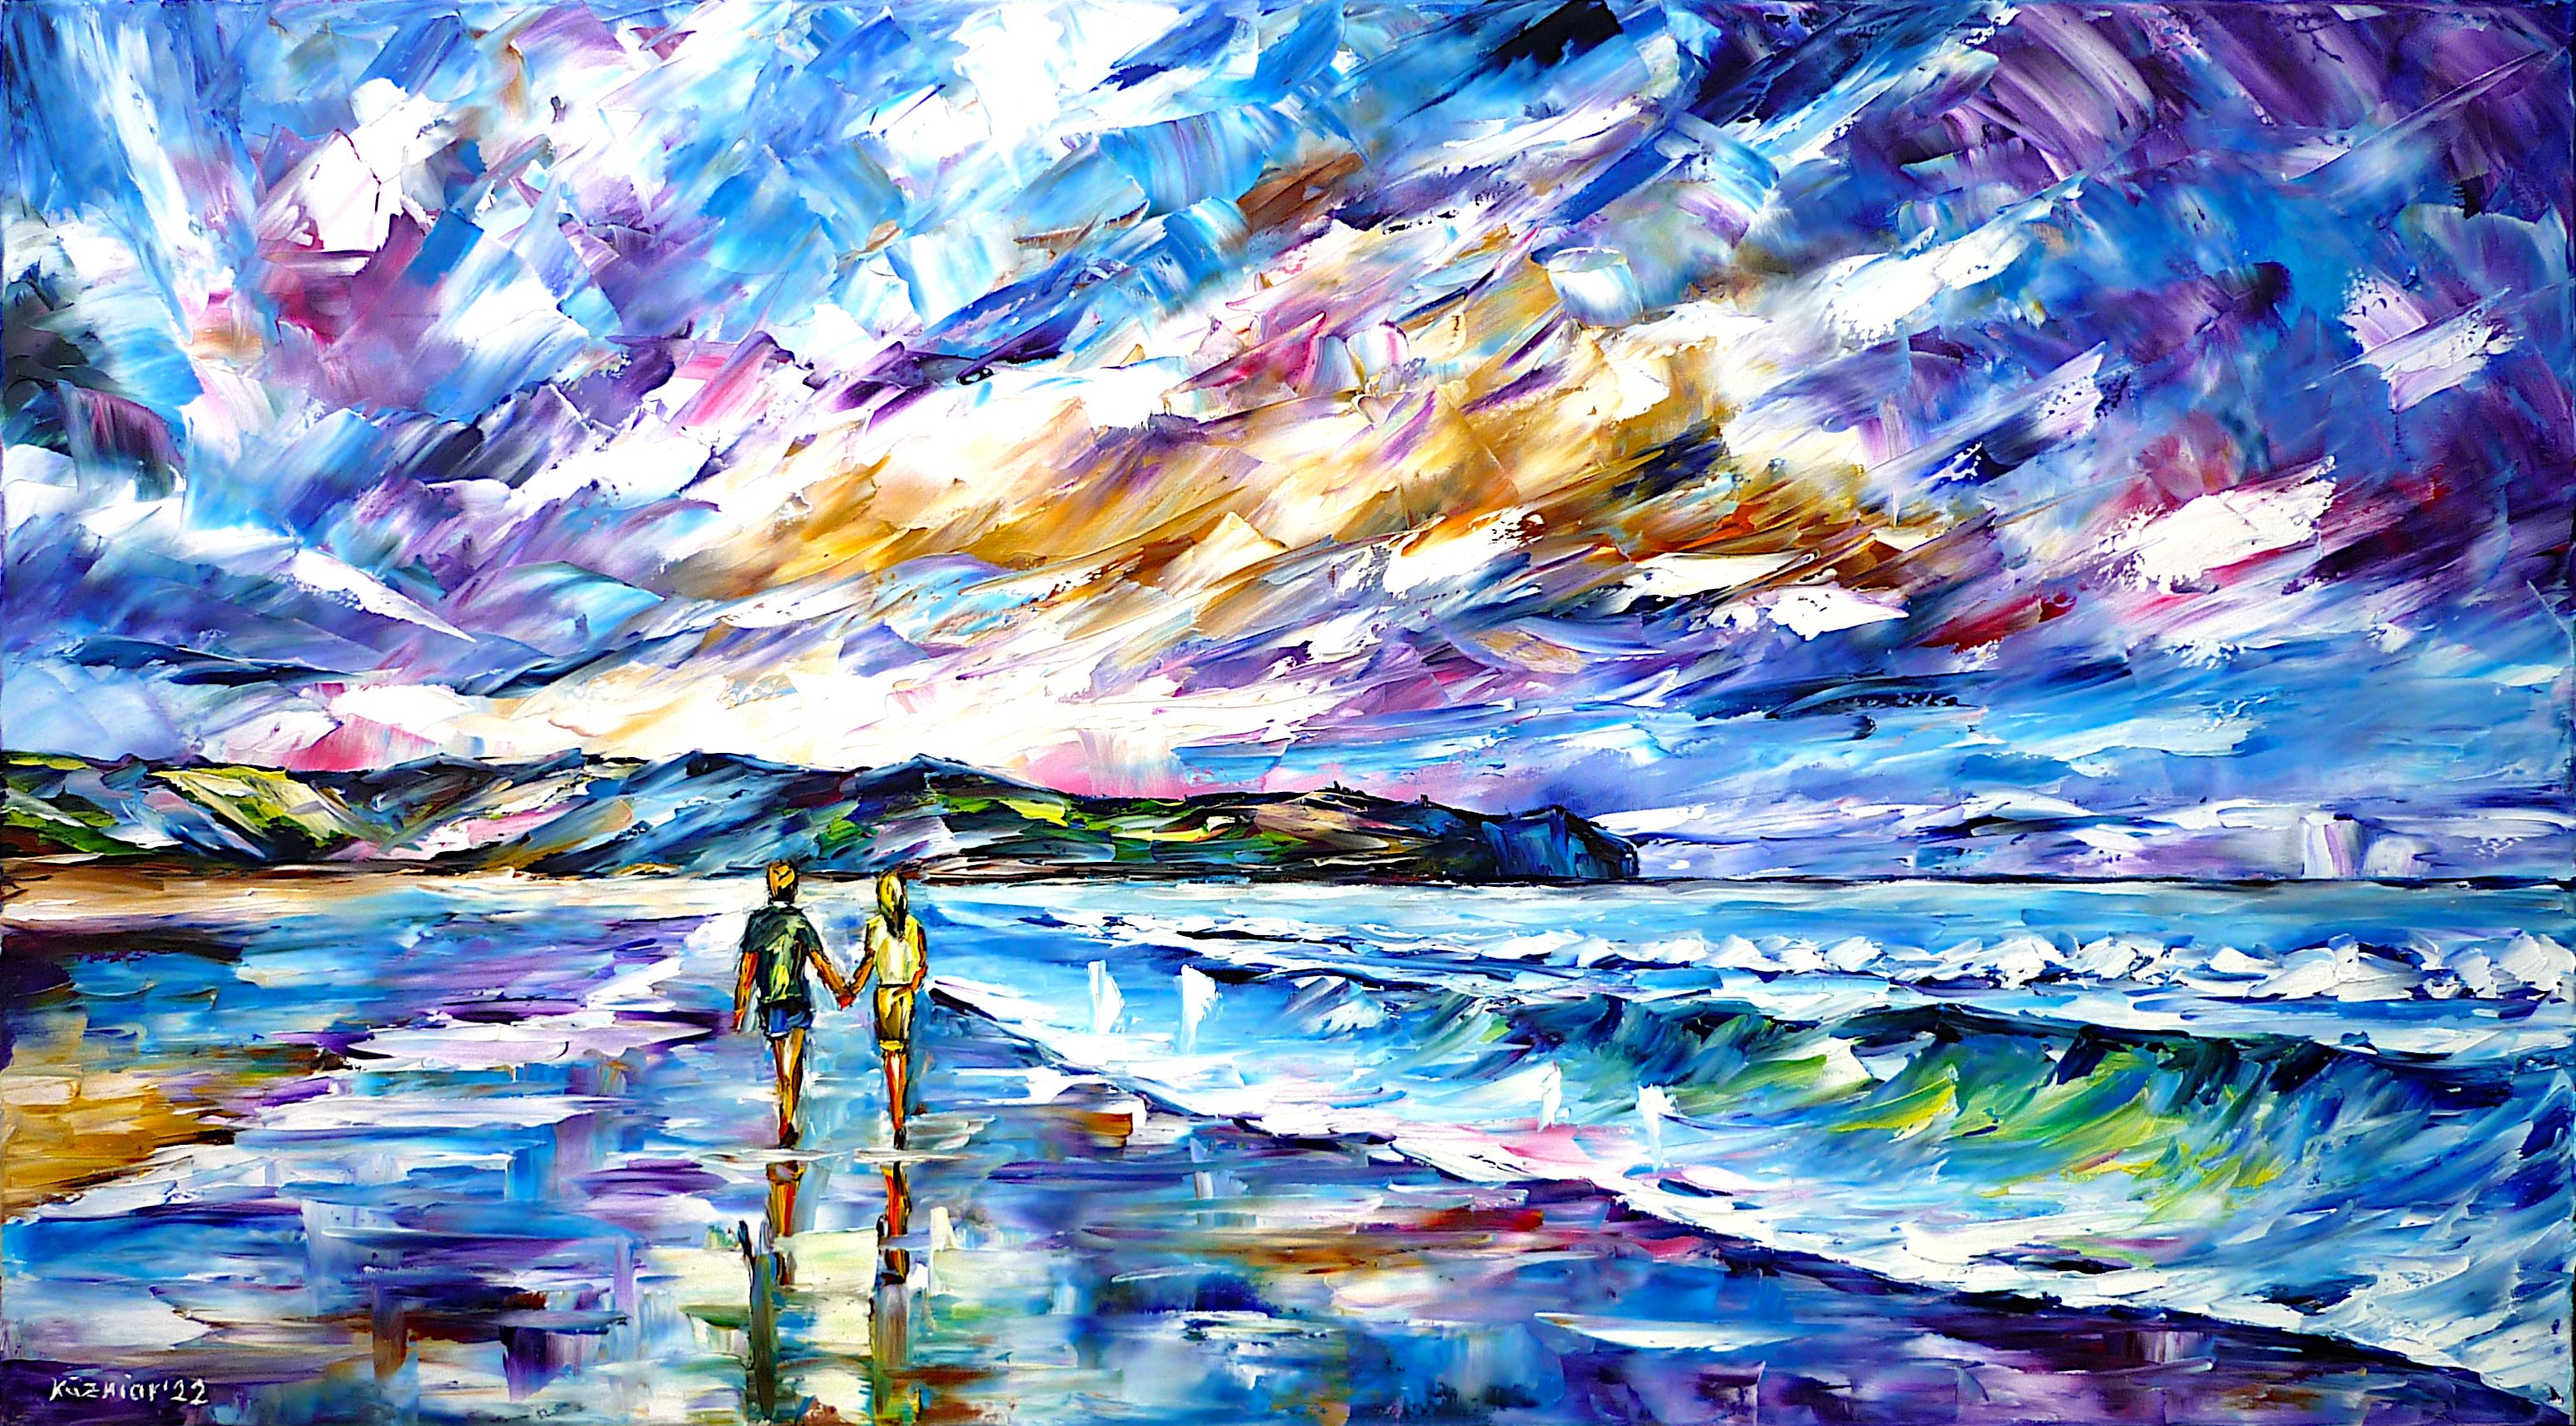 People on the beach,couple in love on the beach,walking on the beach,holding hands,walking hand in hand,beach scene,people in love,couple in love,by the sea,beach waves,seascape,people by the sea,sky over the sea,abstract sky,menacing sky,people by the water,romantic scene,romantic picture,romantic painting,beach painting,sea painting,love,romance,horizontal format,wave lapping,wave foam,blue tones,blue colors,blue picture,palette knife oil painting,modern art,impressionism,expressionism,abstract painting,lively colors,colorful painting,bright colors,light reflections,impasto painting,figurative